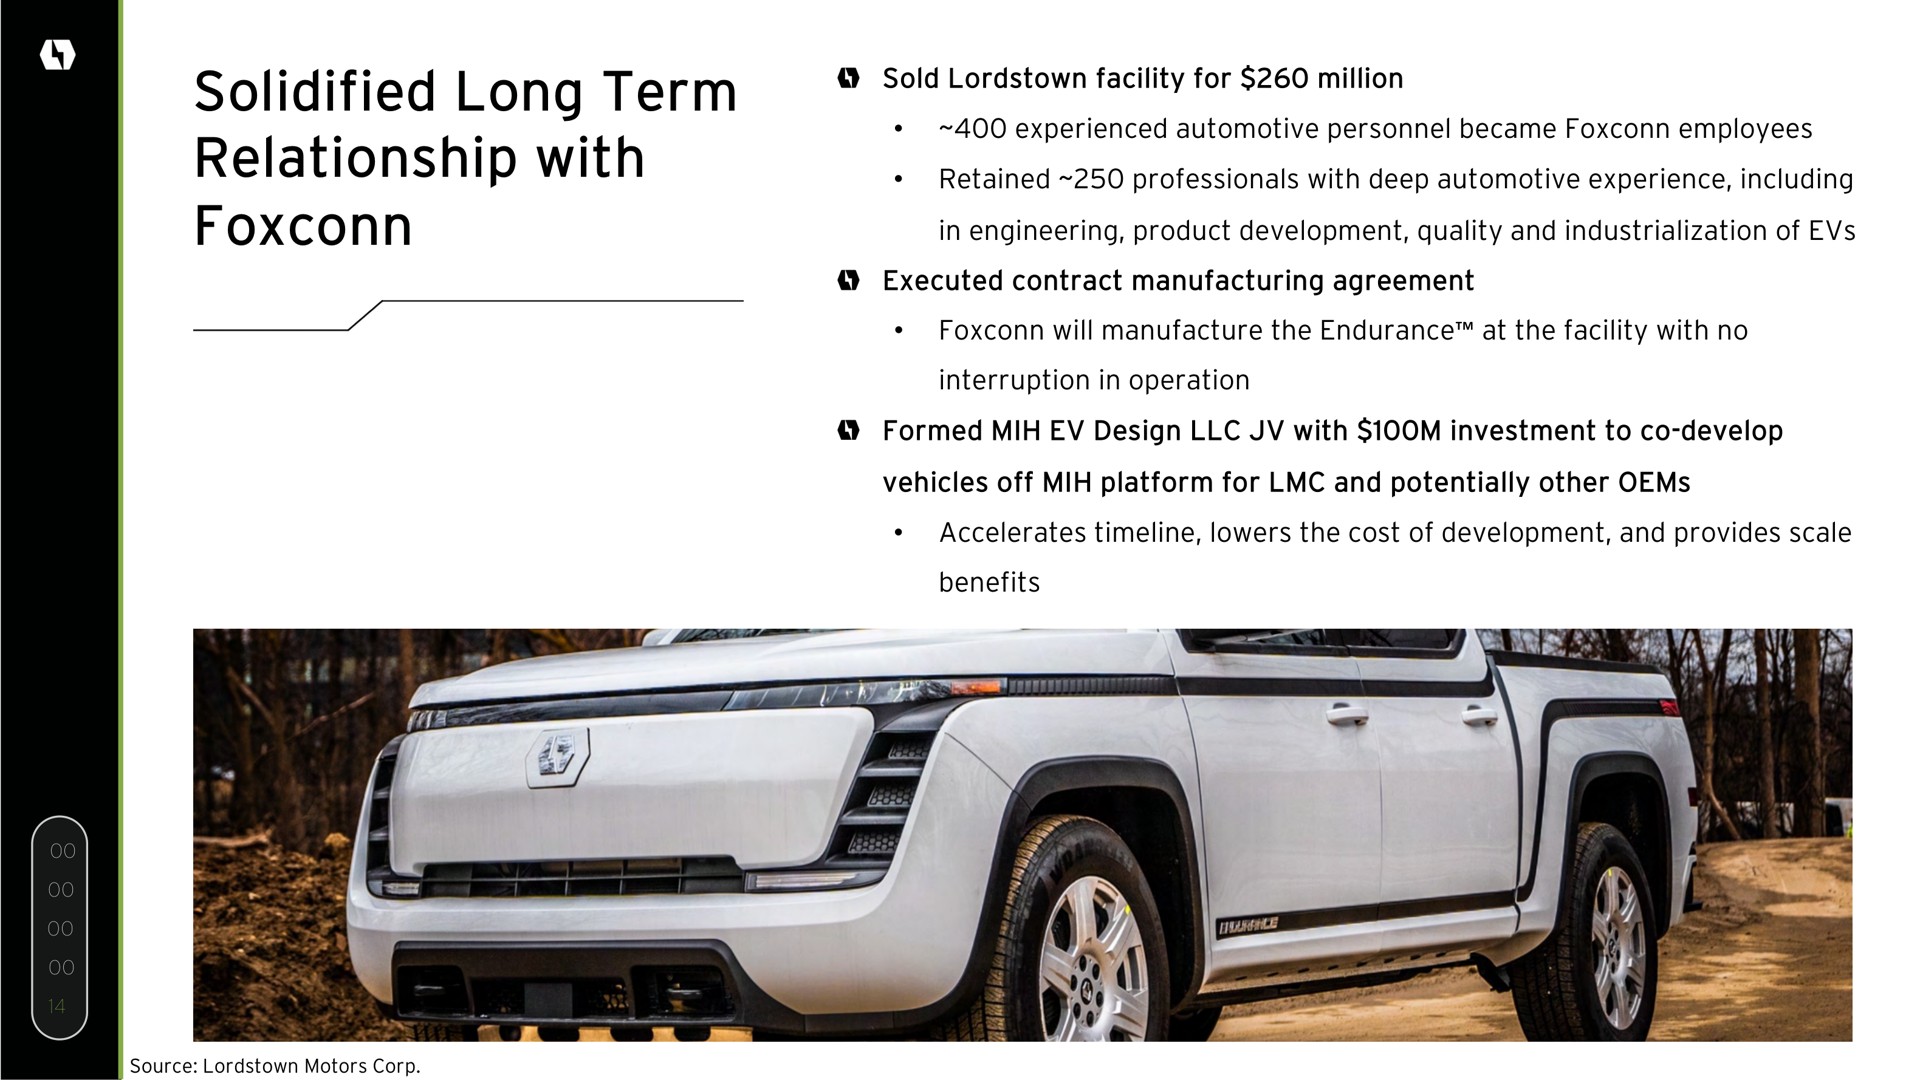 solidified long term relationship with | Lordstown Motors